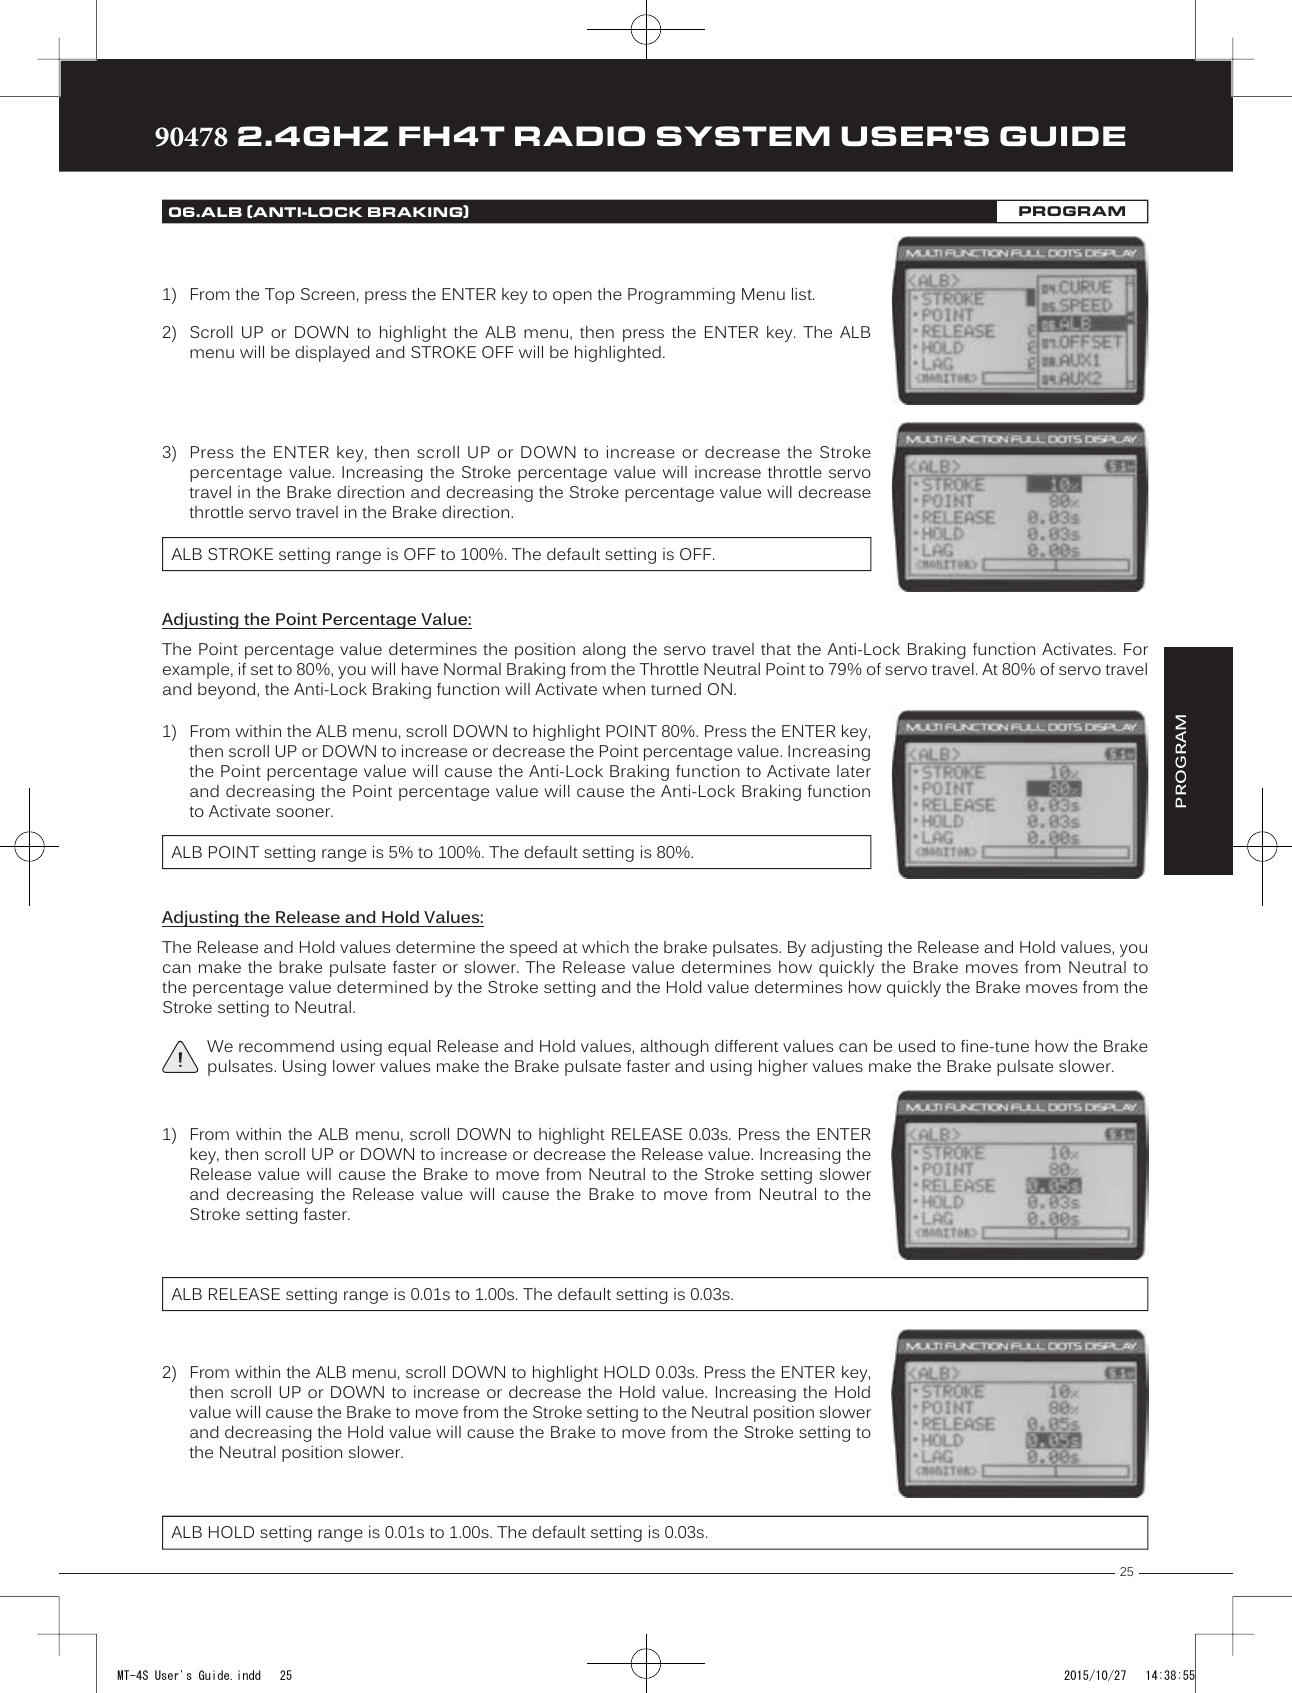 25TRTRTR90478 2.4GHZ FH4T RADIO SYSTEM USER&apos;S GUIDE3) Press the ENTER key,  then scroll  UP or DOWN to increase  or decrease  the Strokepercentage value. Increasing the Stroke percentage value will increase throttle servotravel in the Brake direction and decreasing the Stroke percentage value will decreasethrottle servo travel in the Brake direction.ALB STROKE setting range is OFF to 100%. The default setting is OFF.Adjusting the Point Percentage Value:The Point percentage value determines the position along the servo travel that the Anti-Lock Braking function Activates. For example, if set to 80%, you will have Normal Braking from the Throttle Neutral Point to 79% of servo travel. At 80% of servo travel and beyond, the Anti-Lock Braking function will Activate when turned ON.1) From within the ALB menu, scroll DOWN to highlight POINT 80%. Press the ENTER key,then scroll UP or DOWN to increase or decrease the Point percentage value. Increasingthe Point percentage value will cause the Anti-Lock Braking function to Activate laterand decreasing the Point percentage value will cause the Anti-Lock Braking functionto Activate sooner.ALB POINT setting range is 5% to 100%. The default setting is 80%.Adjusting the Release and Hold Values:The Release and Hold values determine the speed at which the brake pulsates. By adjusting the Release and Hold values, you can make the brake pulsate faster or slower. The Release value determines how quickly the Brake moves from Neutral to the percentage  value determined by the Stroke setting and the Hold value determines how quickly the Brake moves from the Stroke setting to Neutral.We recommend using equal Release and Hold values, although different values can be used to fine-tune how the Brake pulsates. Using lower values make the Brake pulsate faster and using higher values make the Brake pulsate slower.PROGRAM1) From the Top Screen, press the ENTER key to open the Programming Menu list.2) Scroll  UP  or  DOWN  to  highlight  the  ALB  menu,  then  press  the  ENTER  key.  The  ALBmenu will be displayed and STROKE OFF will be highlighted.06.ALB (ANTI-LOCK BRAKING)PROGRAM1) From within the ALB menu, scroll DOWN to highlight RELEASE 0.03s. Press the ENTERkey, then scroll UP or DOWN to increase or decrease the Release value. Increasing theRelease value will cause the Brake to move from Neutral to the Stroke setting slowerand decreasing  the Release value  will cause  the Brake  to  move  from Neutral  to theStroke setting faster.ALB RELEASE setting range is 0.01s to 1.00s. The default setting is 0.03s.2) From within the ALB menu, scroll DOWN to highlight HOLD 0.03s. Press the ENTER key,then scroll UP or DOWN to increase or decrease the Hold value. Increasing the Holdvalue will cause the Brake to move from the Stroke setting to the Neutral position slowerand decreasing the Hold value will cause the Brake to move from the Stroke setting tothe Neutral position slower.ALB HOLD setting range is 0.01s to 1.00s. The default setting is 0.03s.MT-4S User&apos;s Guide.indd   25 2015/10/27   14:38:55